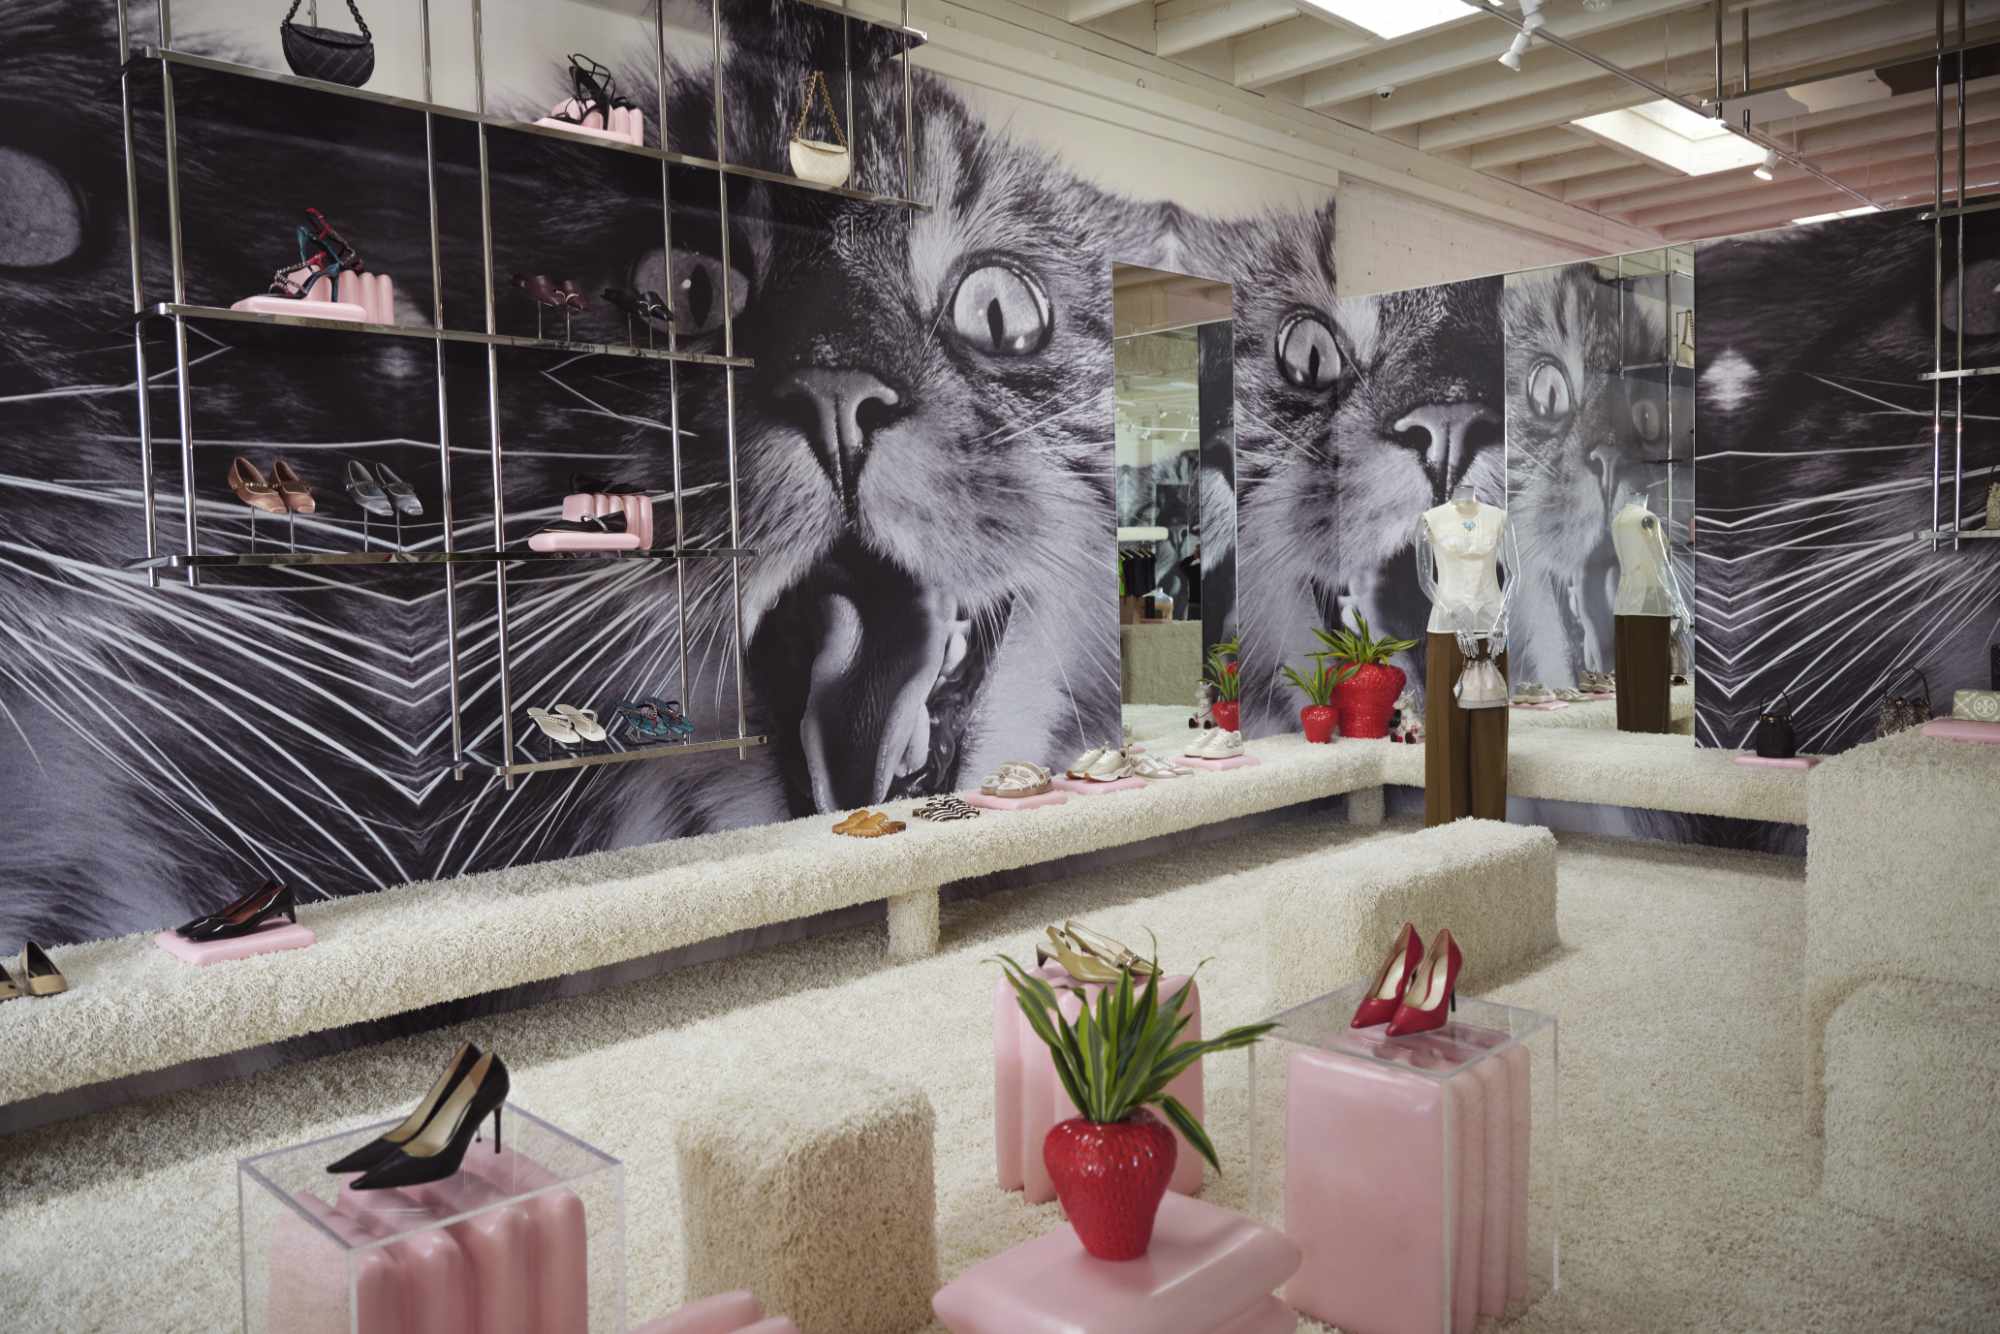 Tory Burch's cat-themed pop-up store in Los Angeles